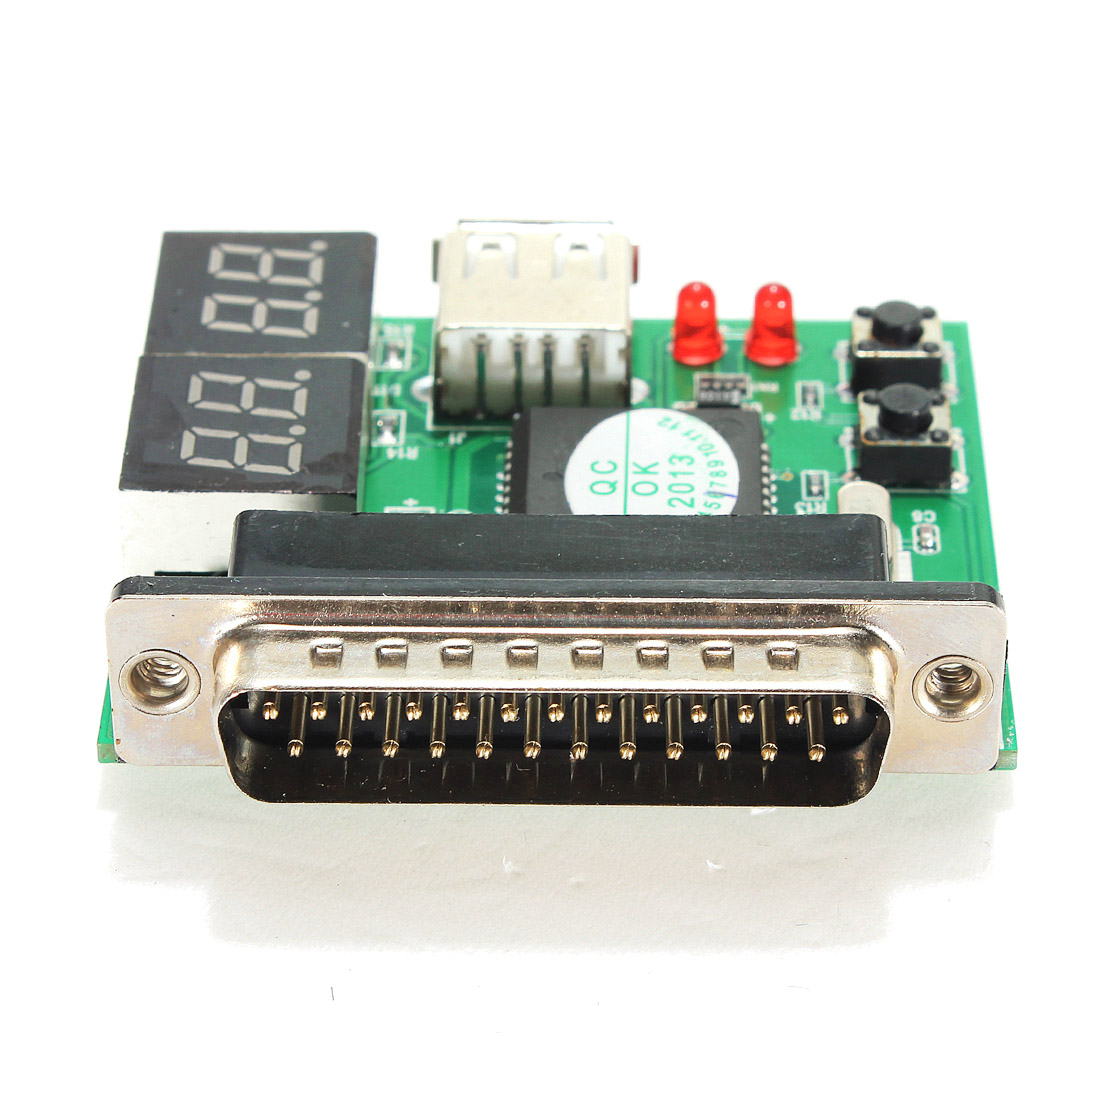 5pcs-Computer-Accessories-PC-Diagnostic-Card-USB-Post-Card-Motherboard-Analyzer-Tester-for-Notebook--1550786